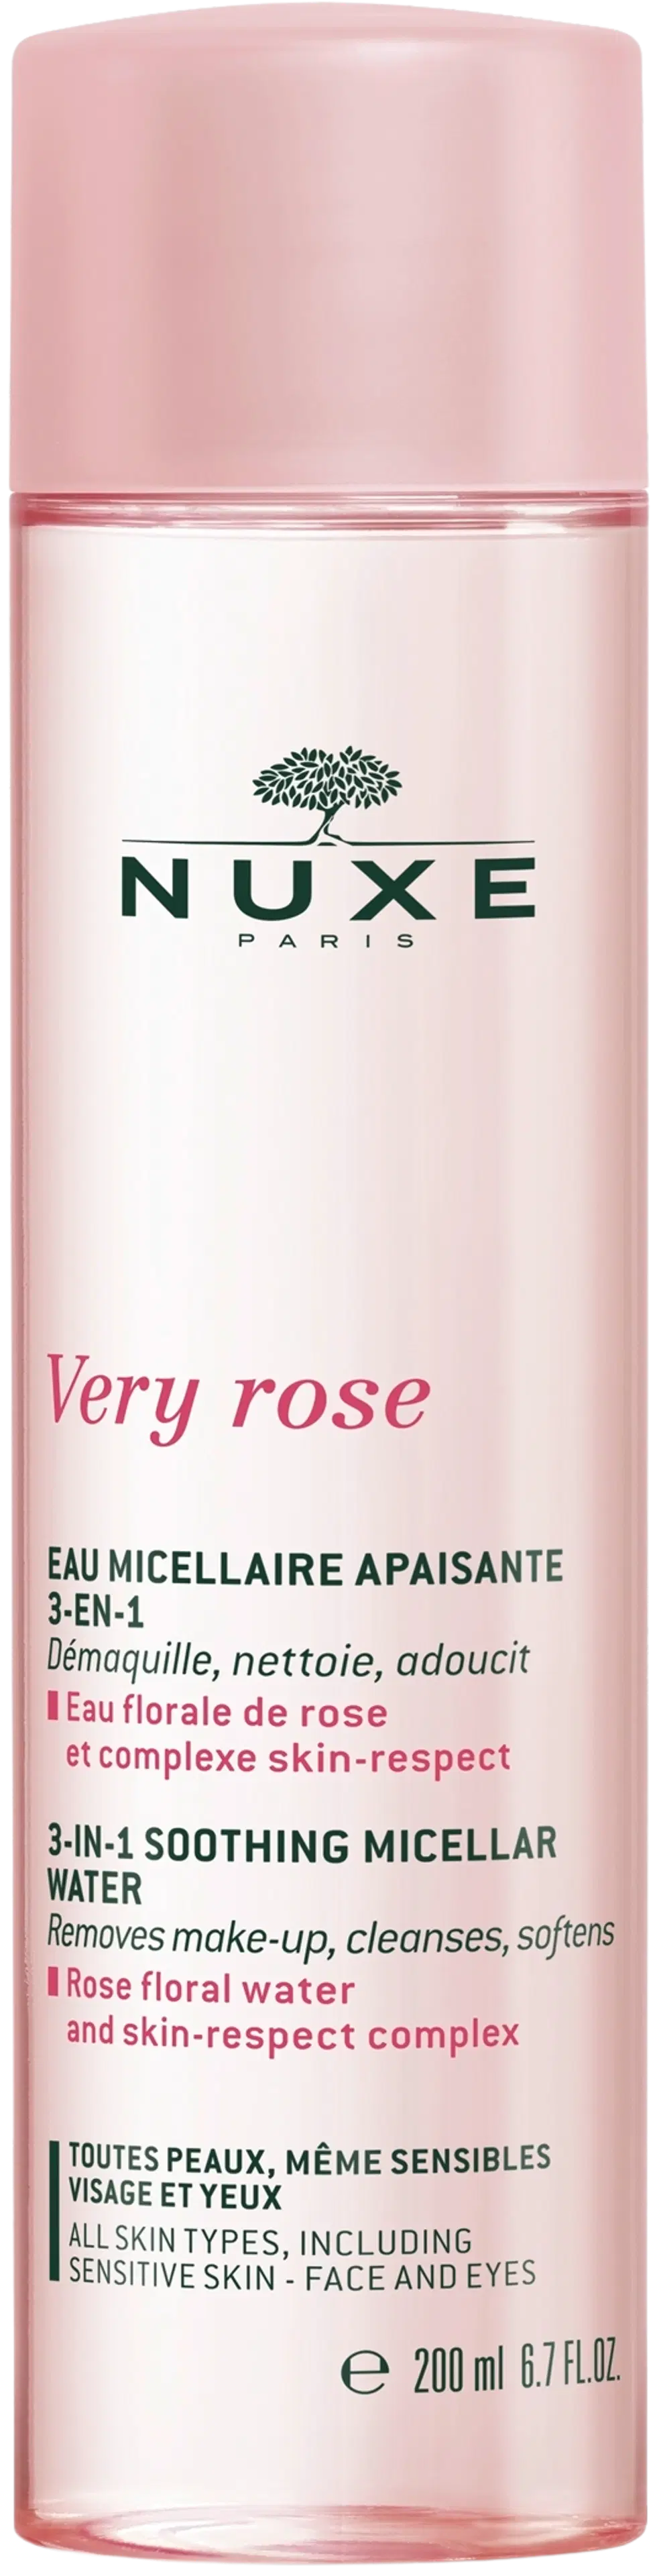 NUXE Very Rose 3-in-1 Soothing Micellar Water for face and eyes misellivesi 200 ml